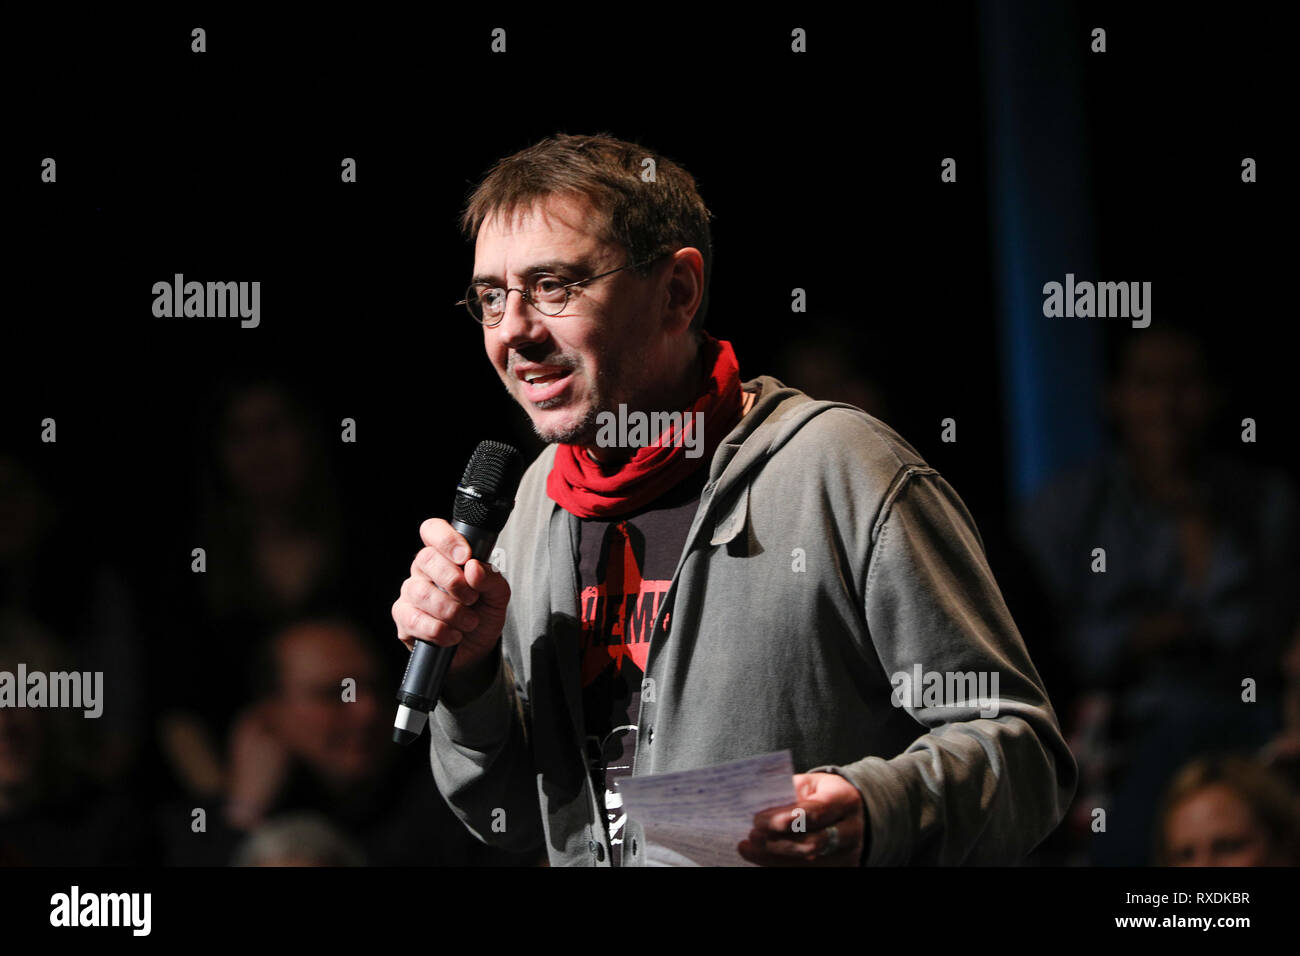 Madrid, Spain. 09th March, 2019.Juan Carlos Monedero seen speaking at the closing of the event #PodemosEnMarcha2019 Credit: Jesús Hellin/Alamy Live News Stock Photo